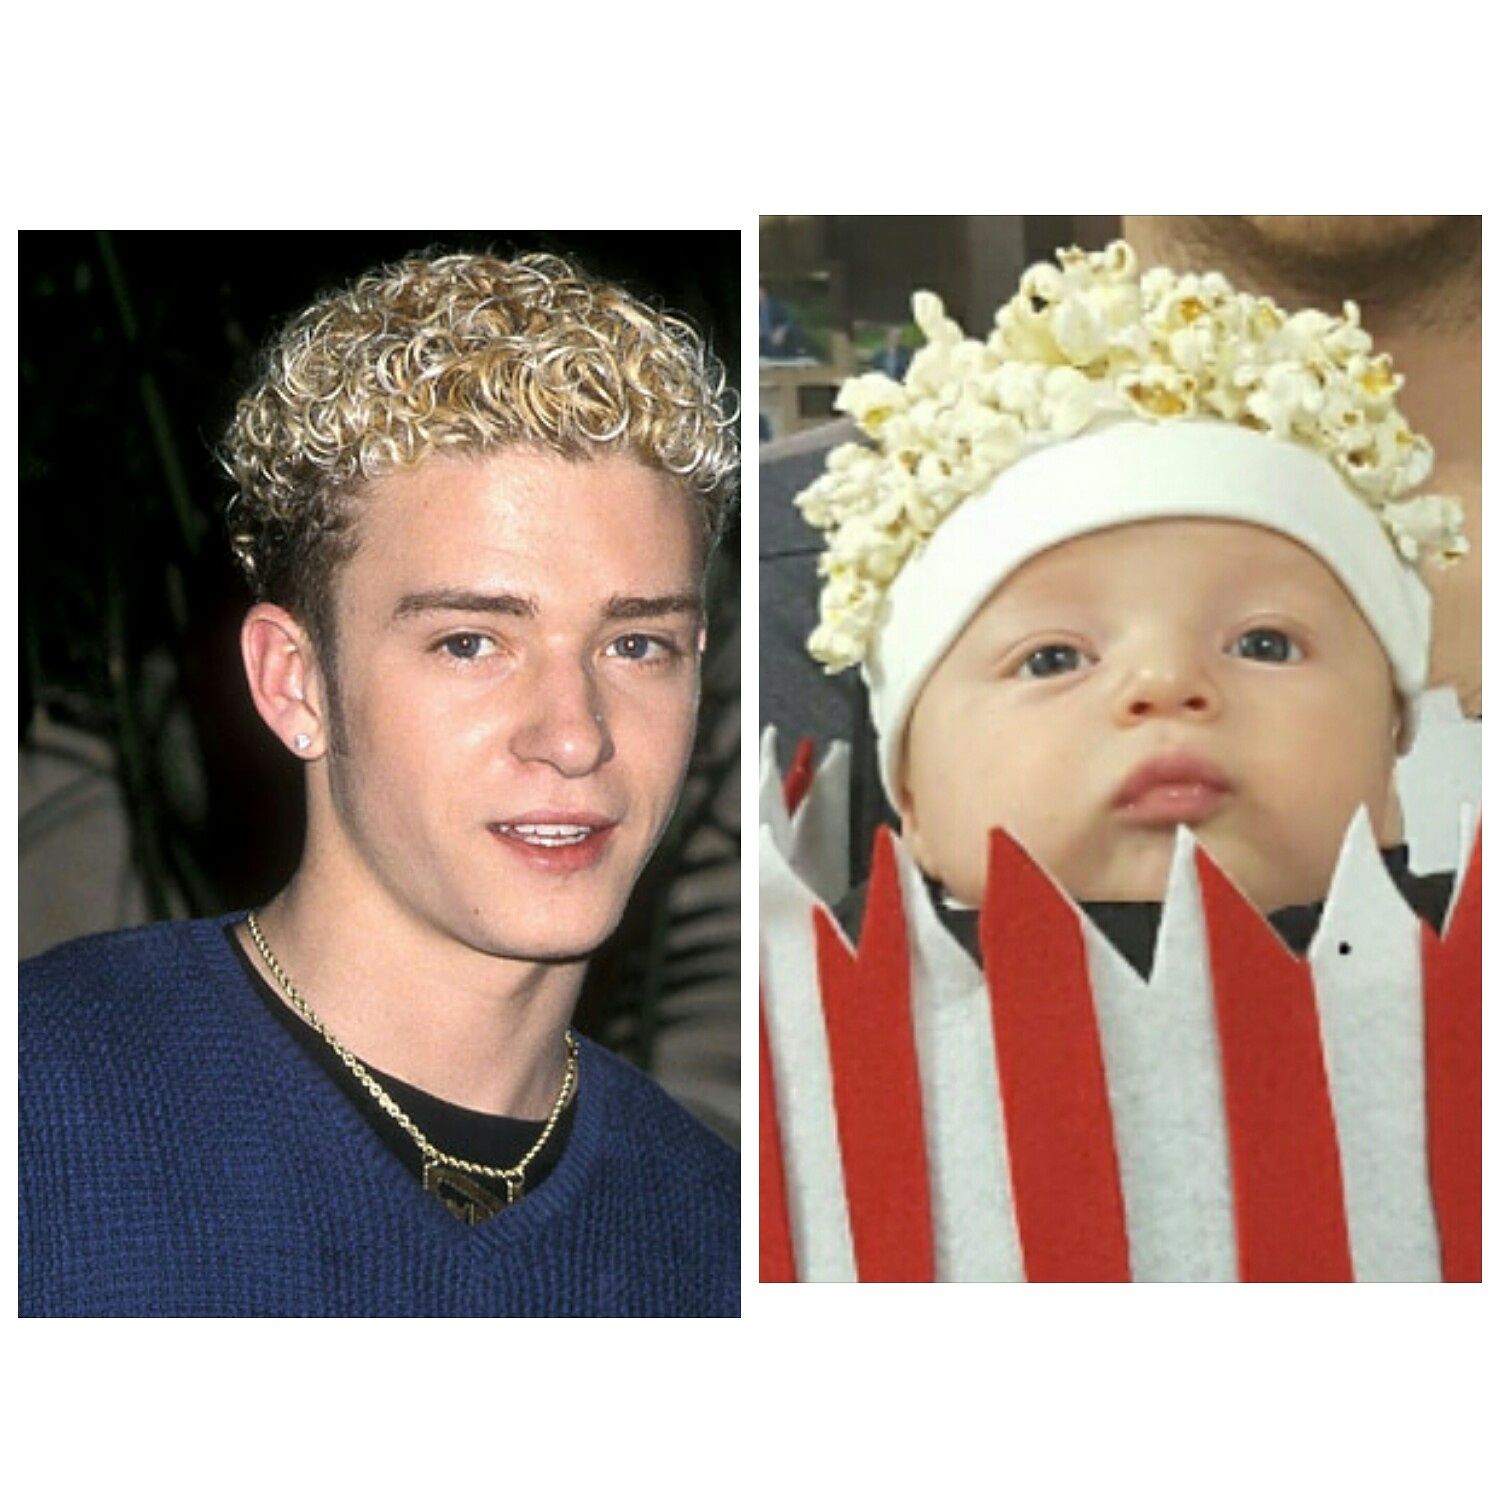 When your son's popcorn Hallowe'en costume resembles a 90's Justin Timberlake